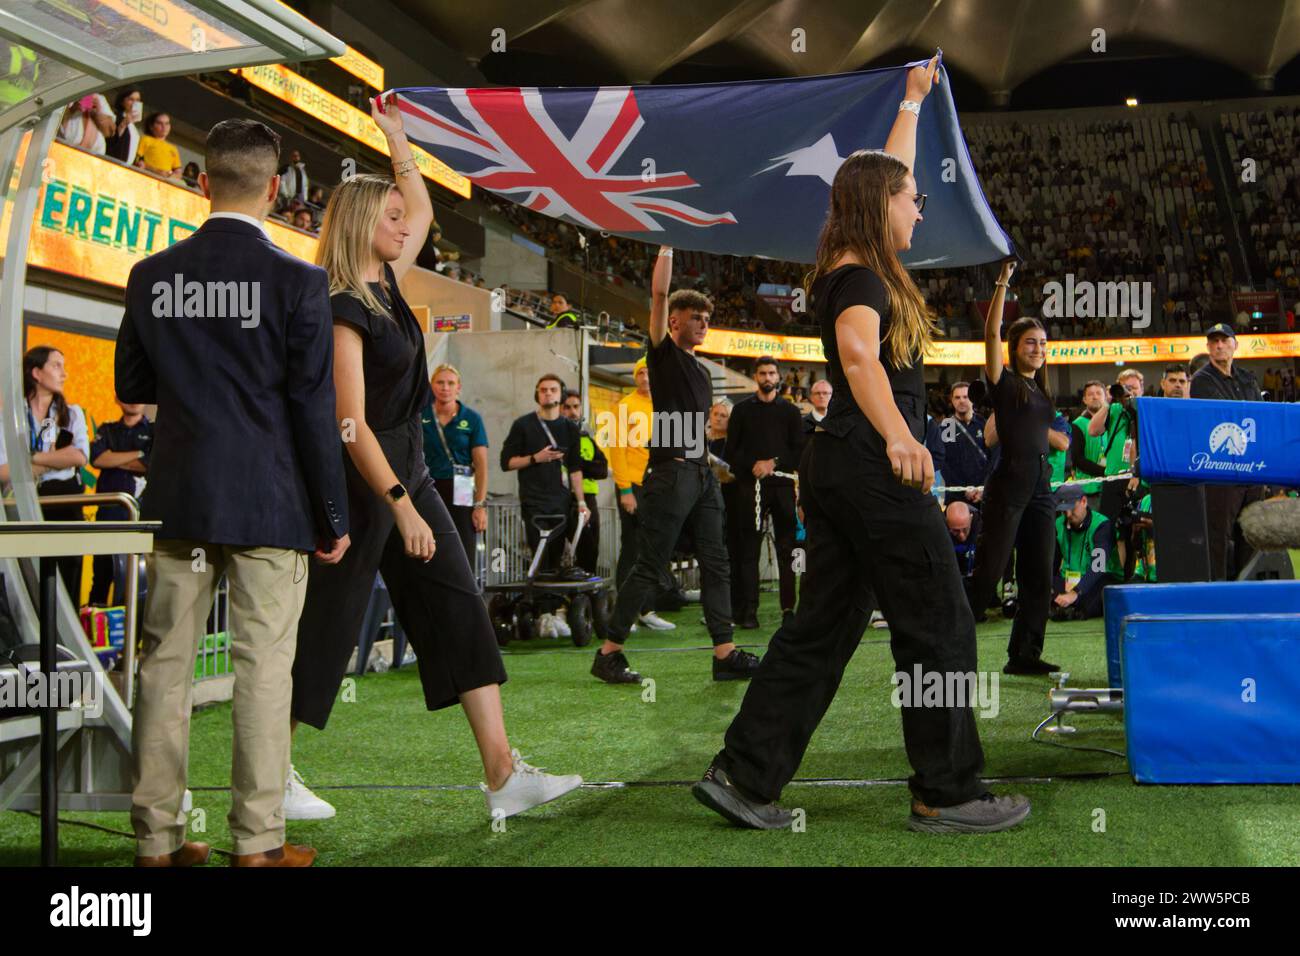 Sydney, Australia. 21st Mar, 2024. The Australian Flag enters the pitch before the FIFA World Cup 2026 Qualifier match between Australia and Lebanon at Western Sydney Stadium on March 21, 2024 in Sydney, Australia Credit: IOIO IMAGES/Alamy Live News Stock Photo